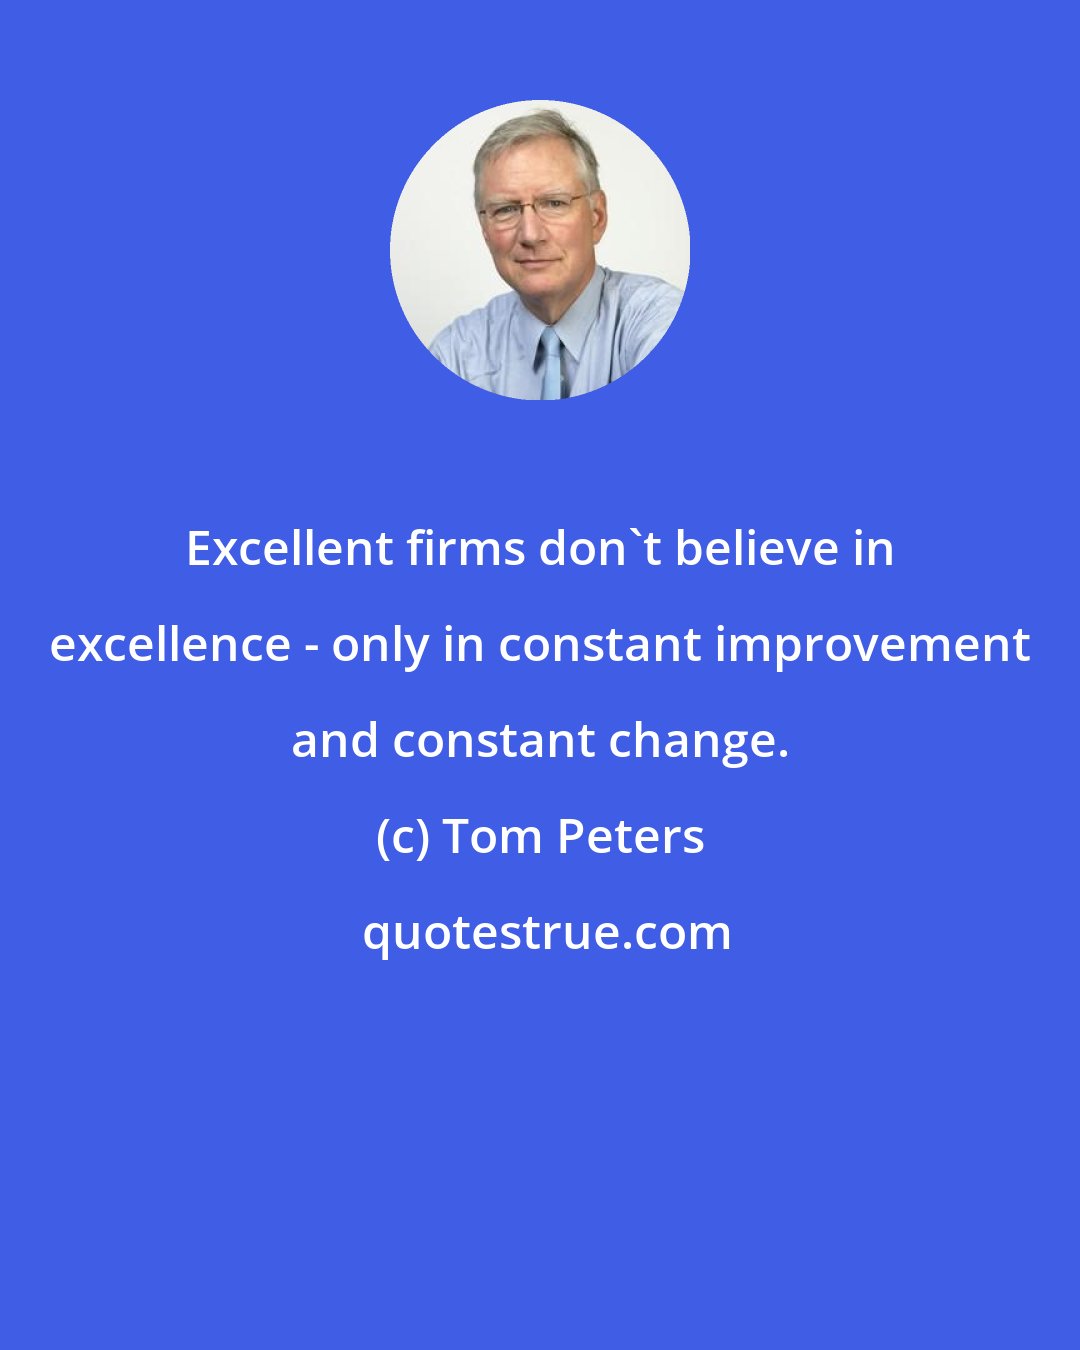 Tom Peters: Excellent firms don't believe in excellence - only in constant improvement and constant change.